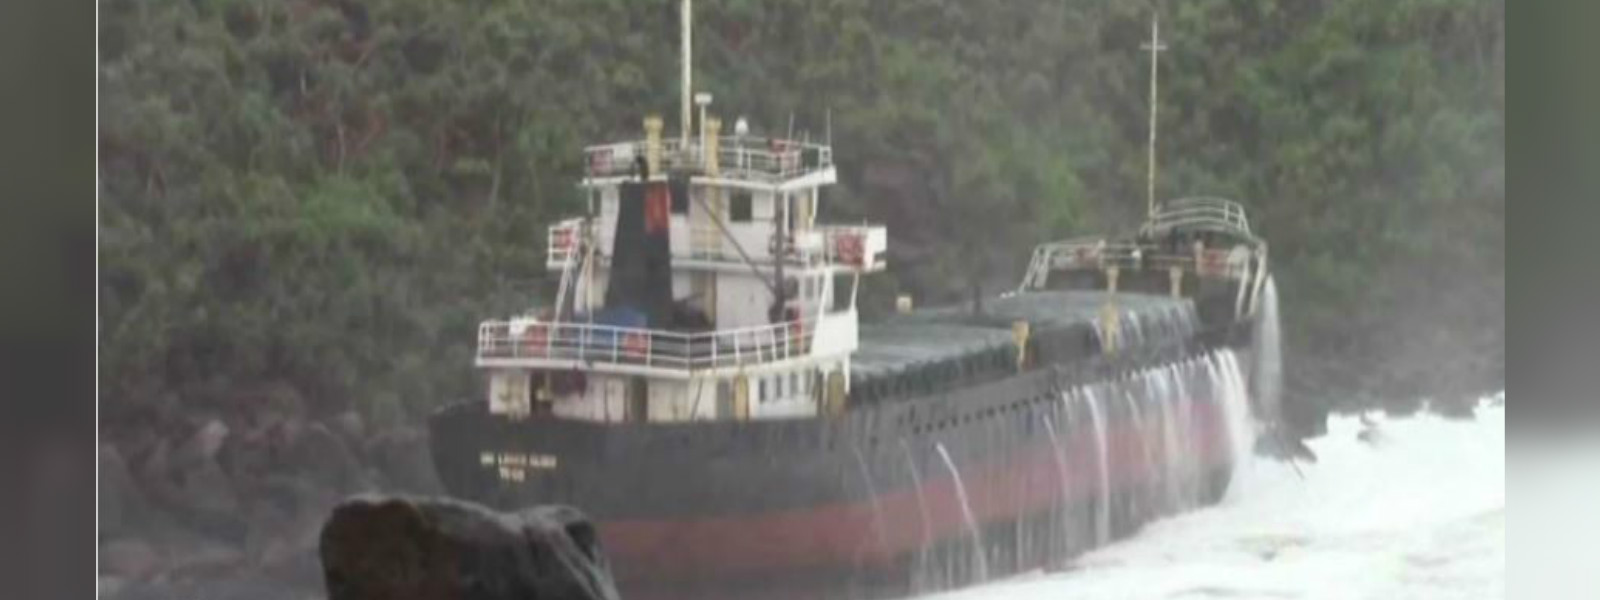 Fuel removal from “Sri Lanka Glory” suspended